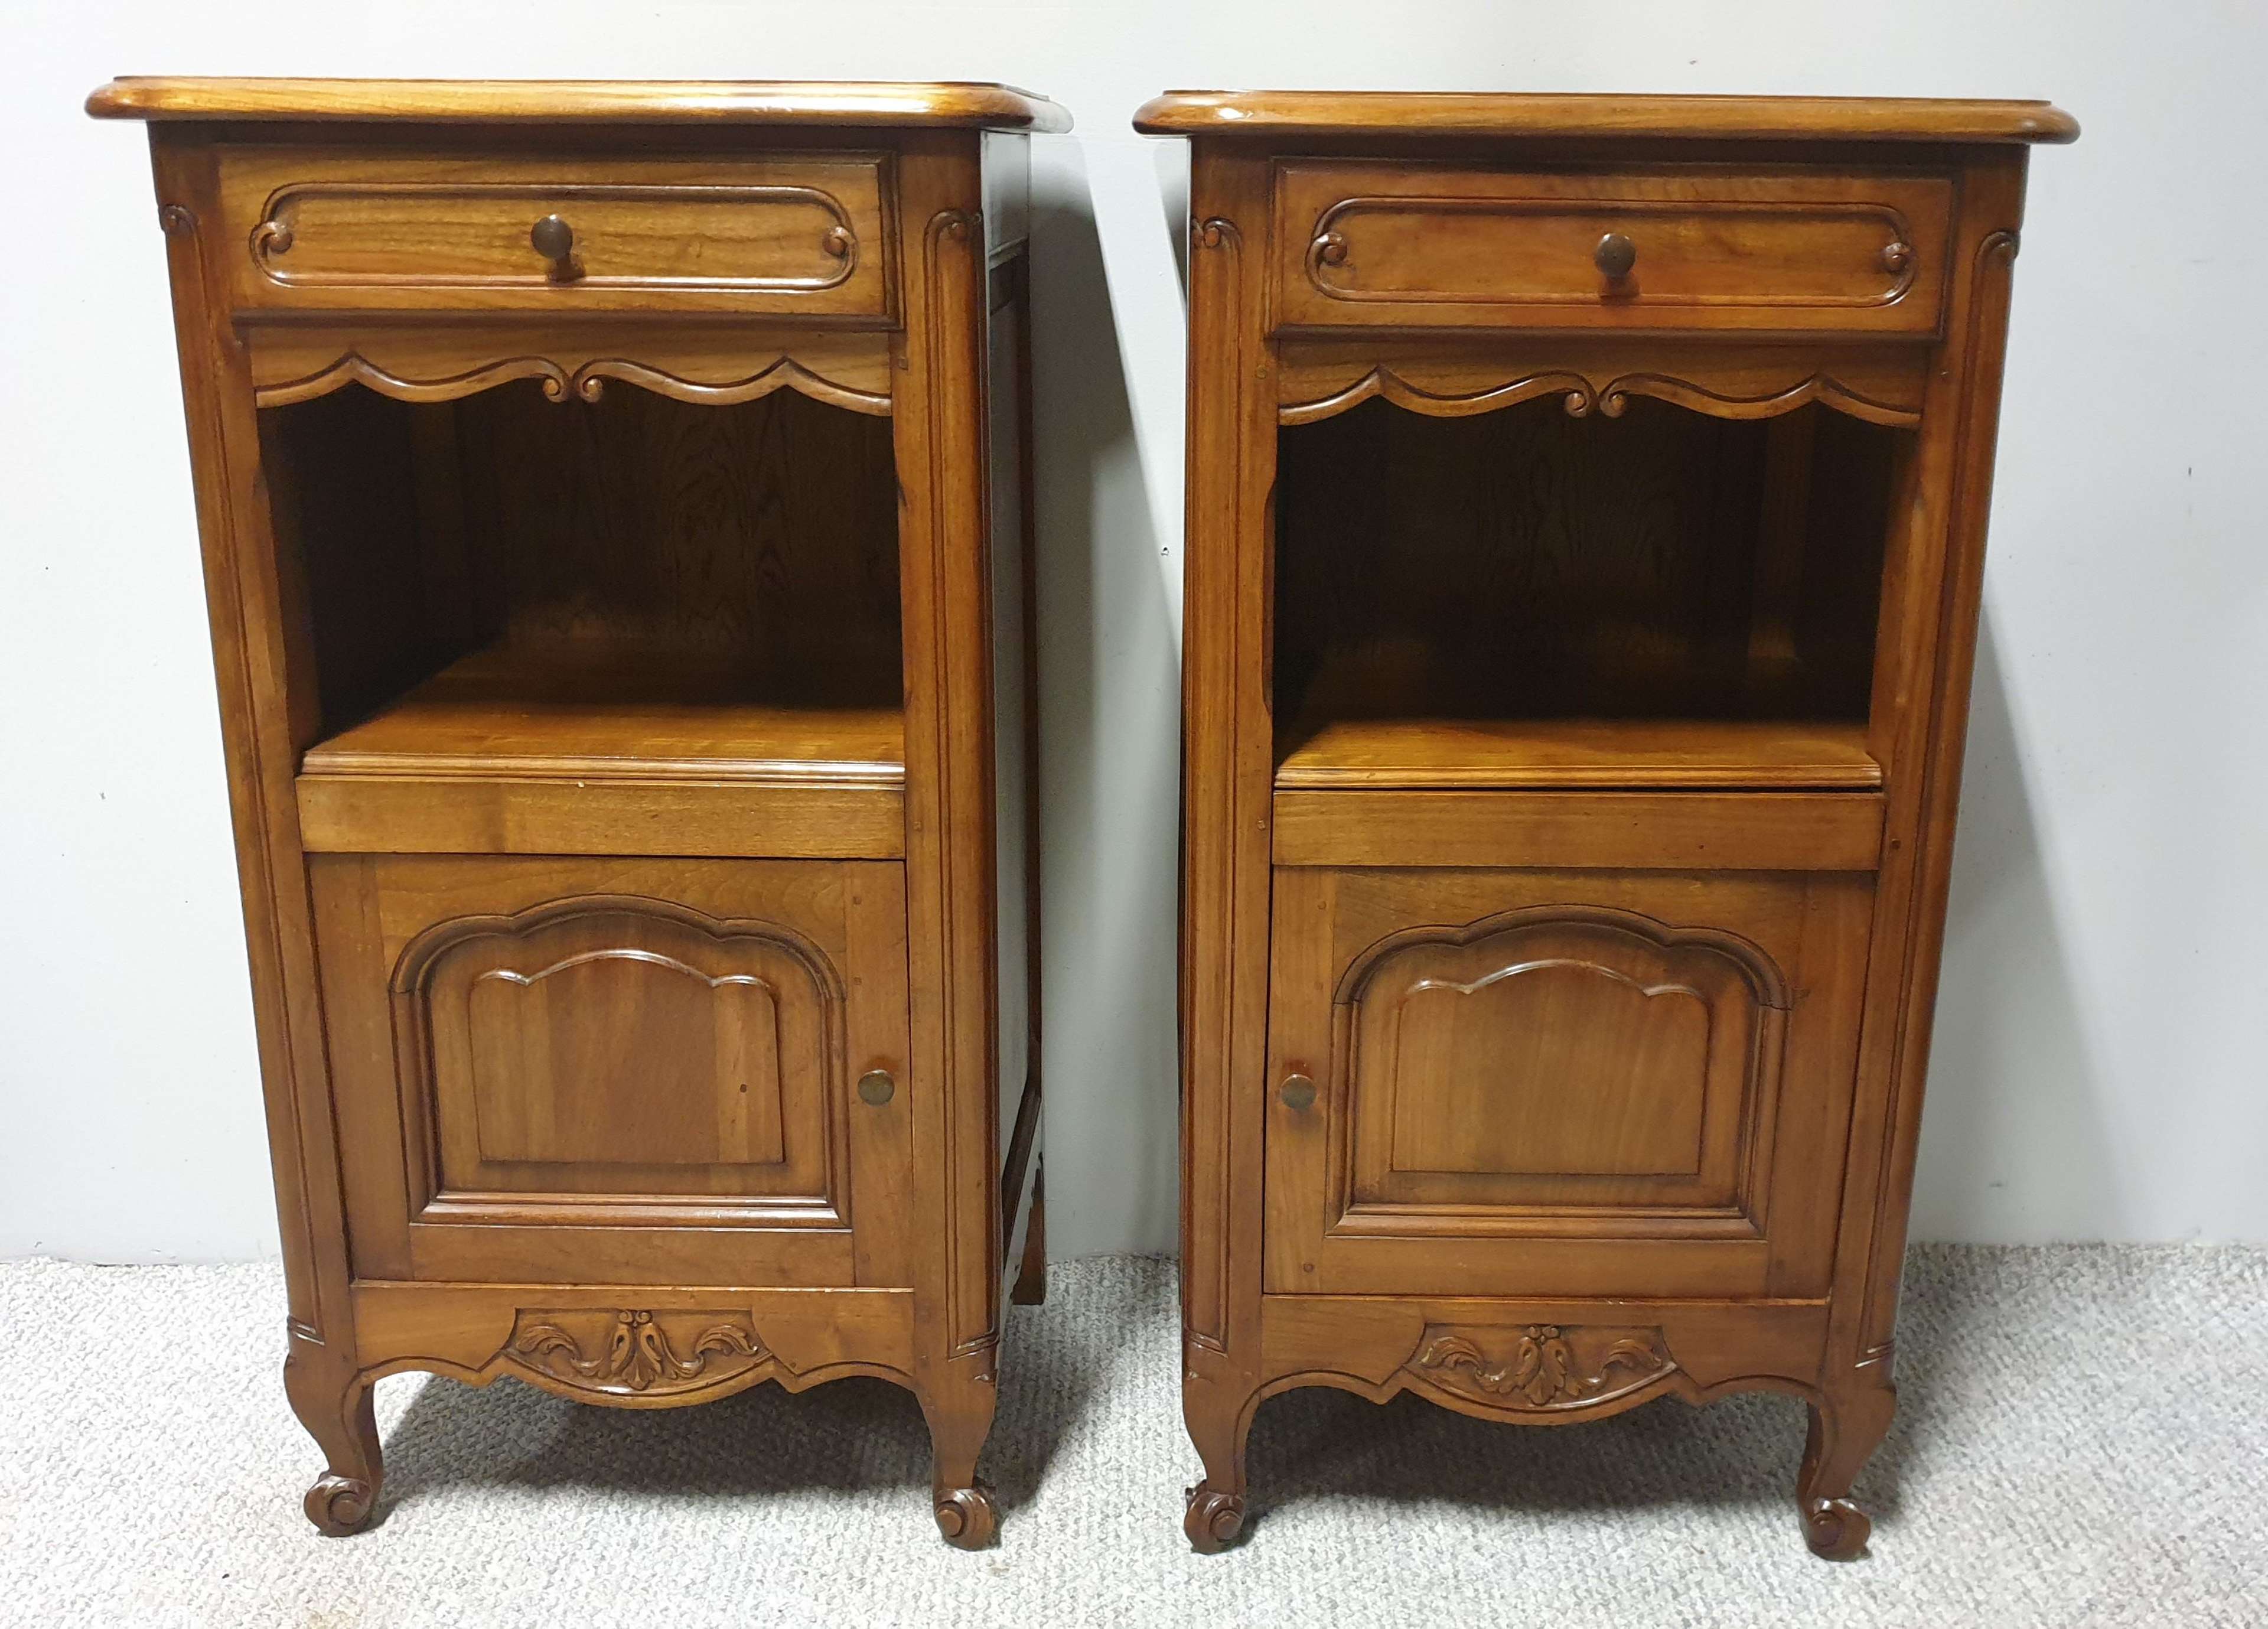 PAIR FRENCH BEDSIDE LAMP CABINETS